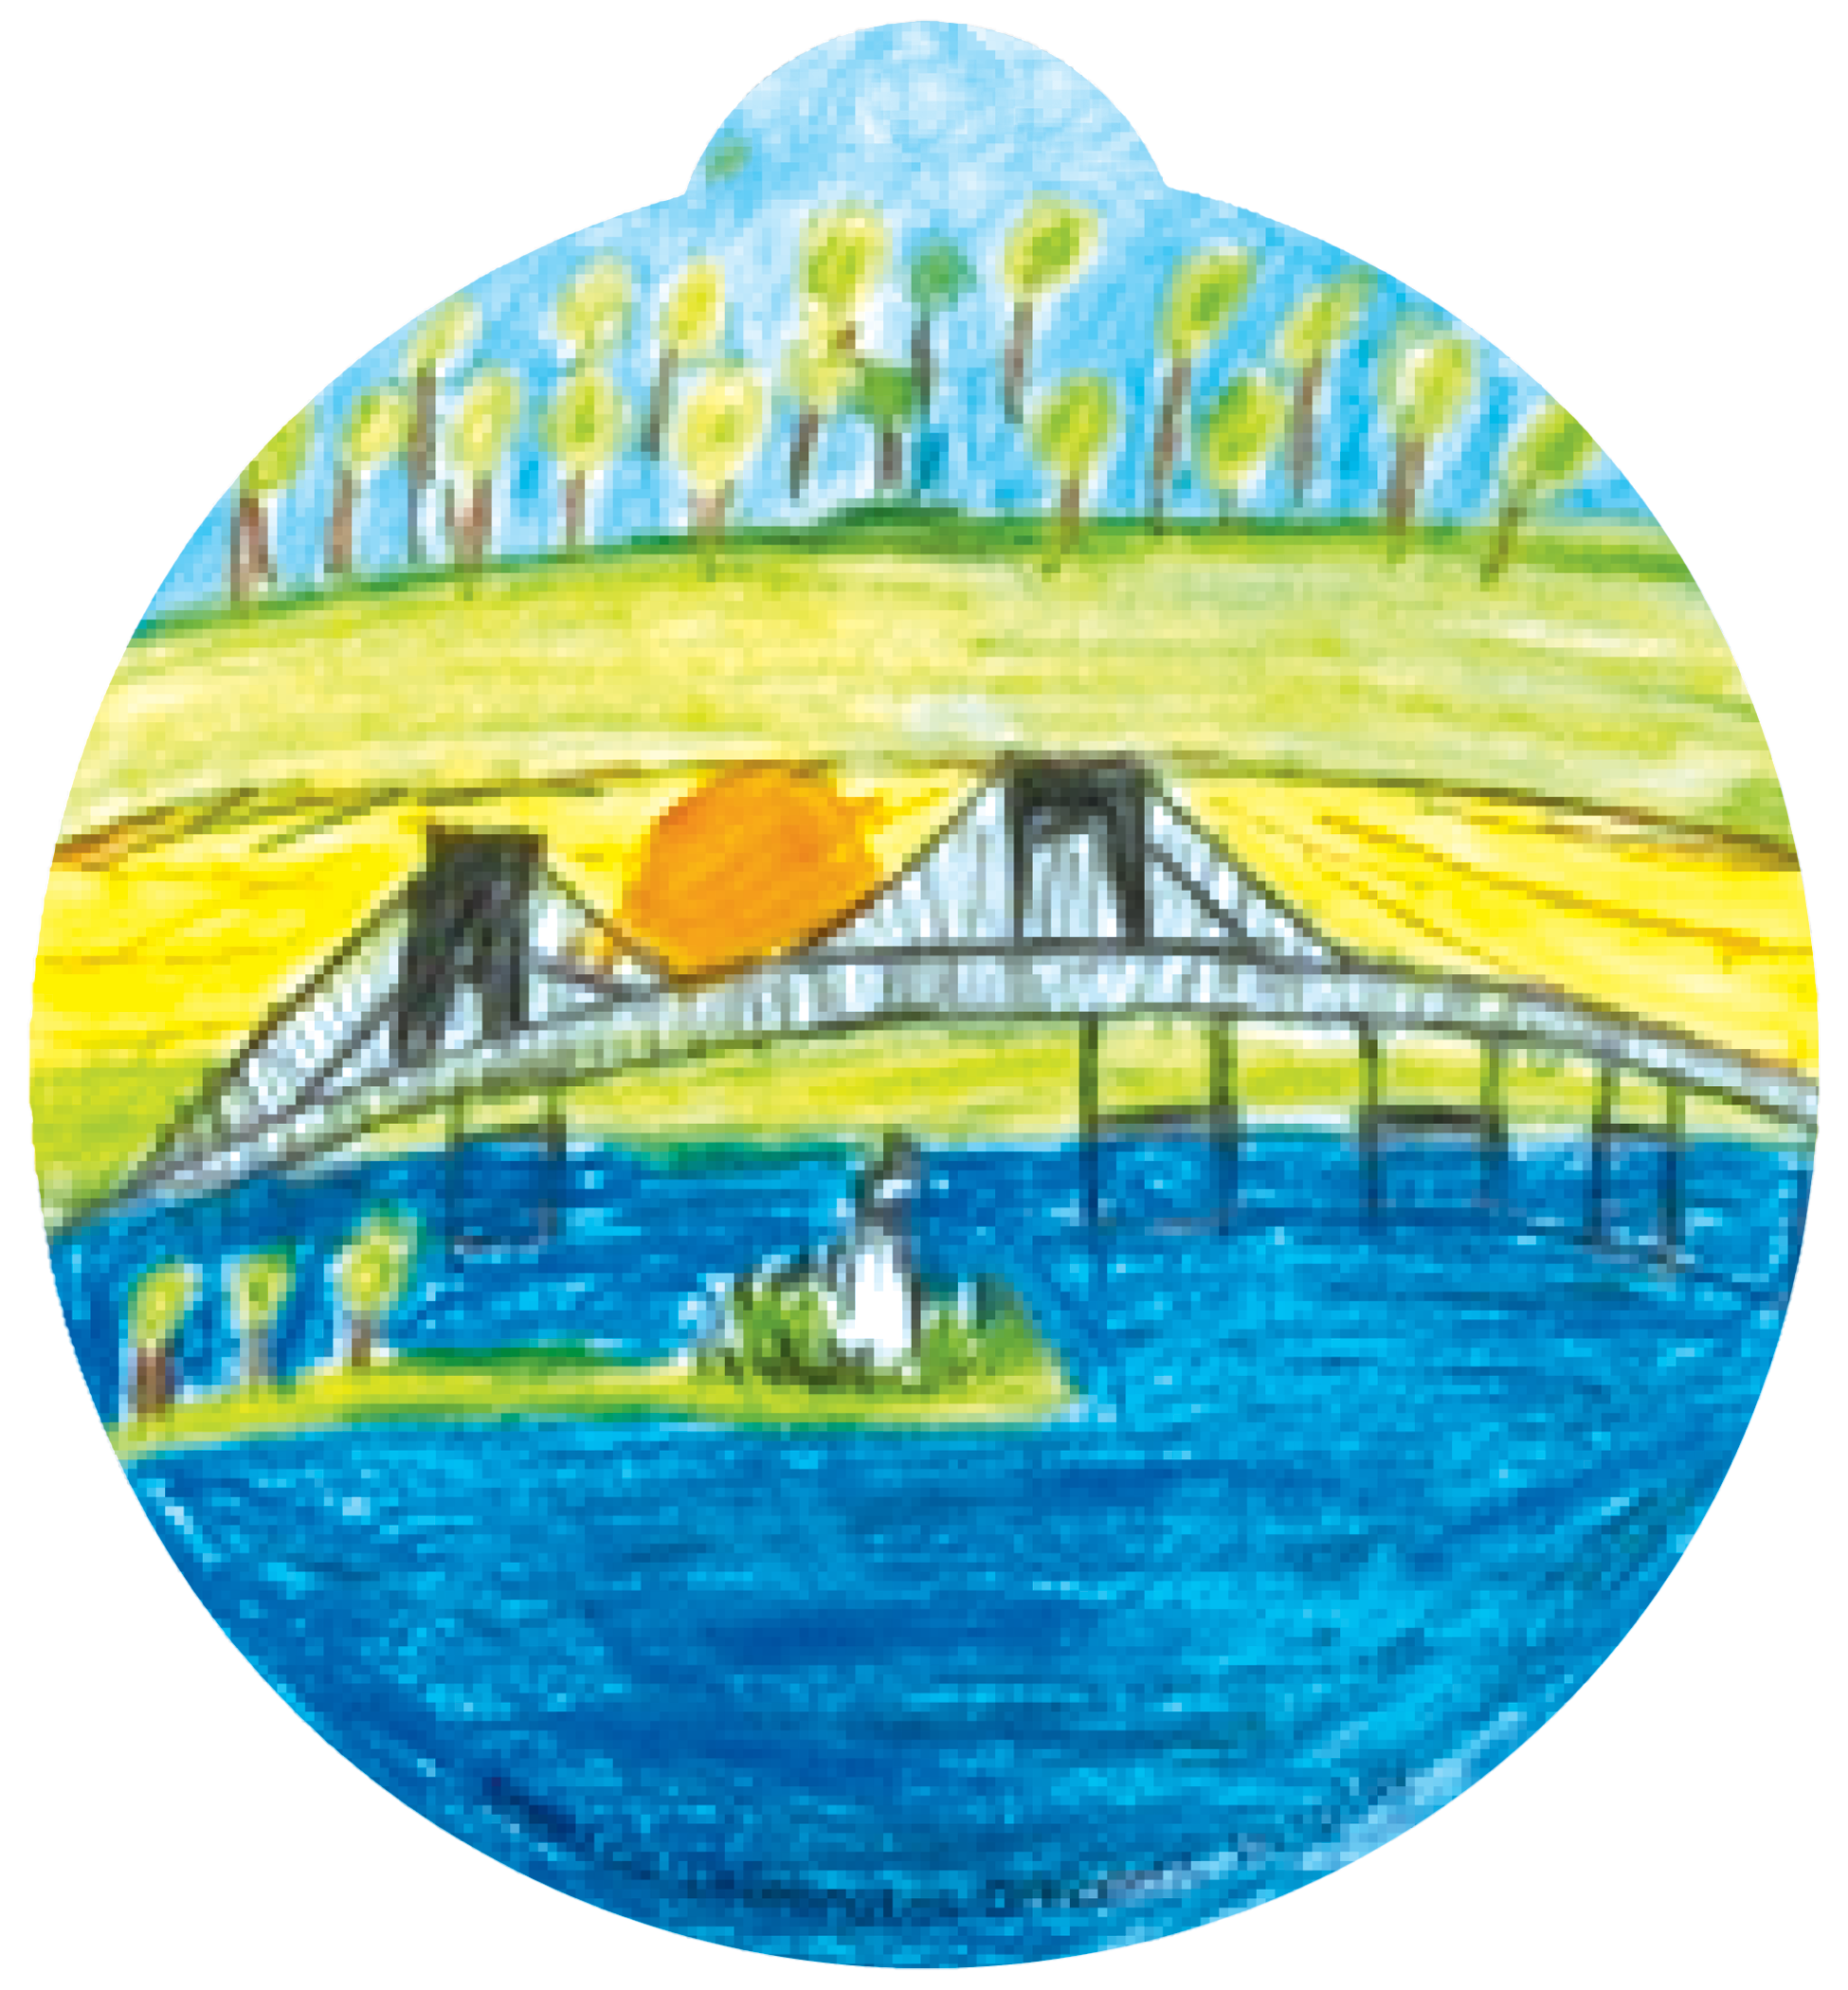 ornament depicting fields, a bridge over water